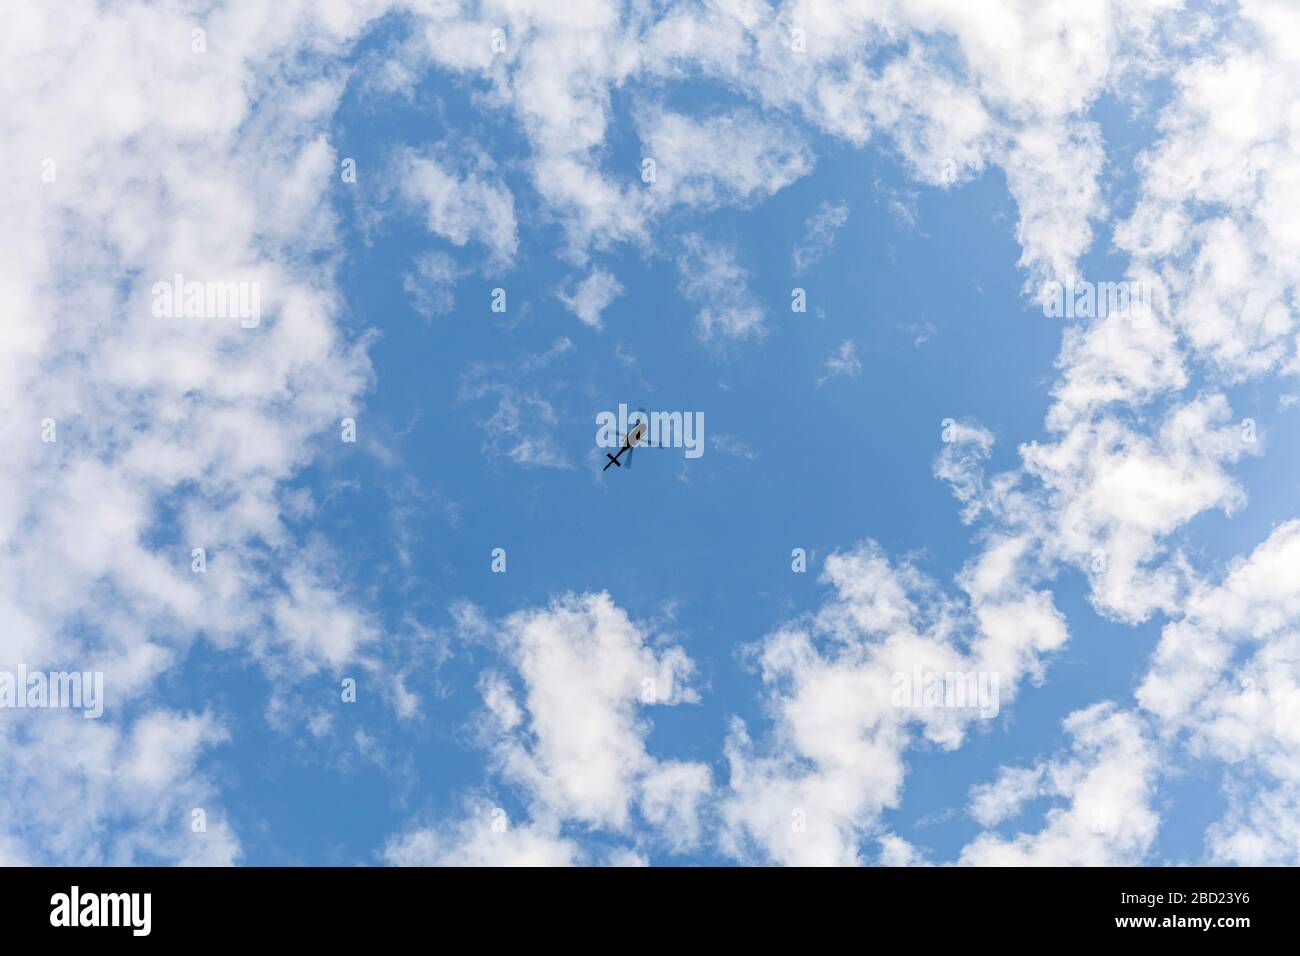 Airborne helicopter viewed from below Stock Photo